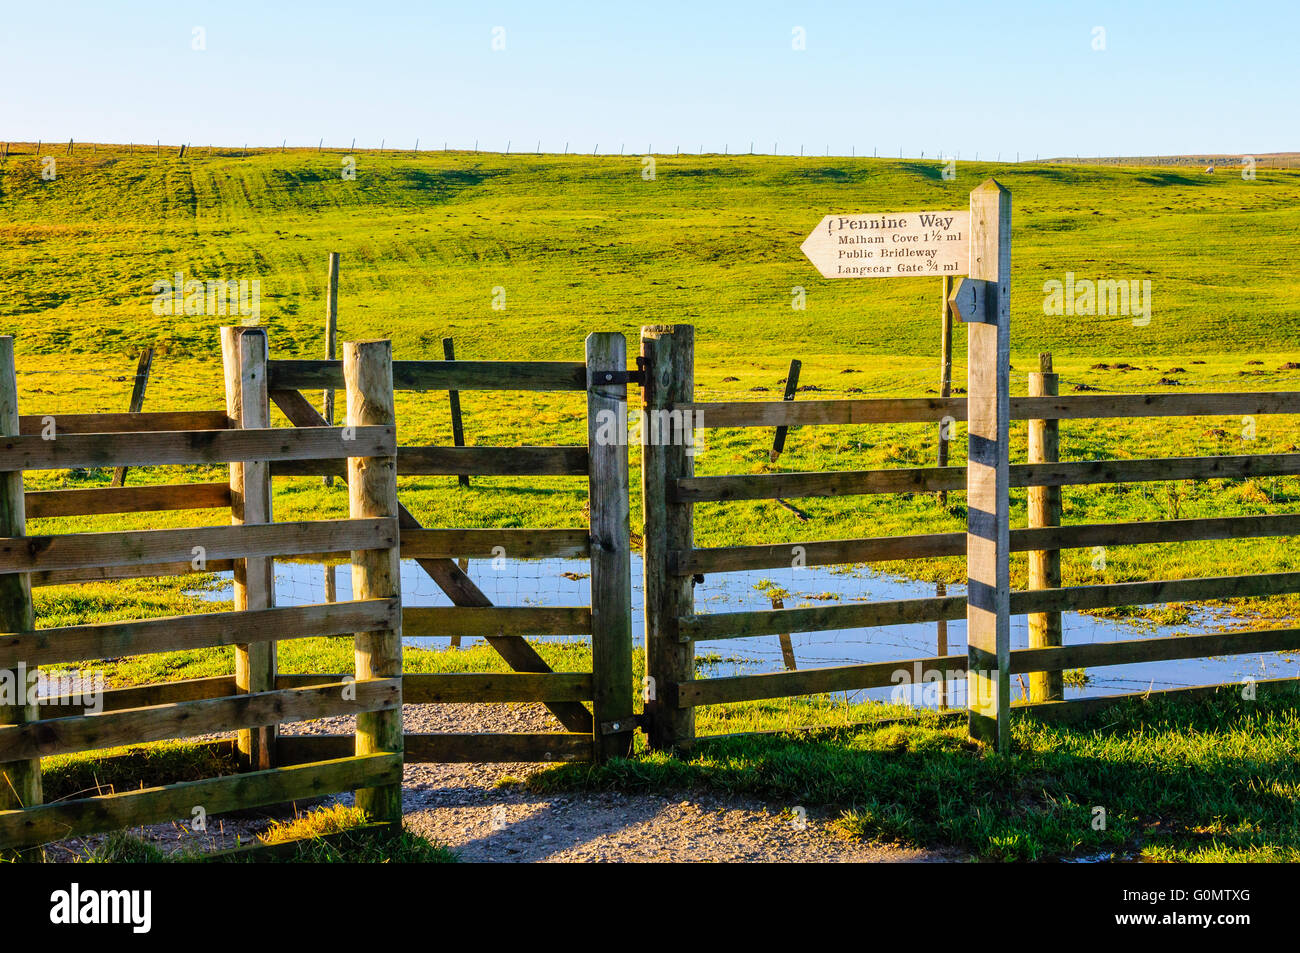 Gate and sign near Malham Tarn on the Pennine Way in the Yorkshire Dales National Park England Stock Photo